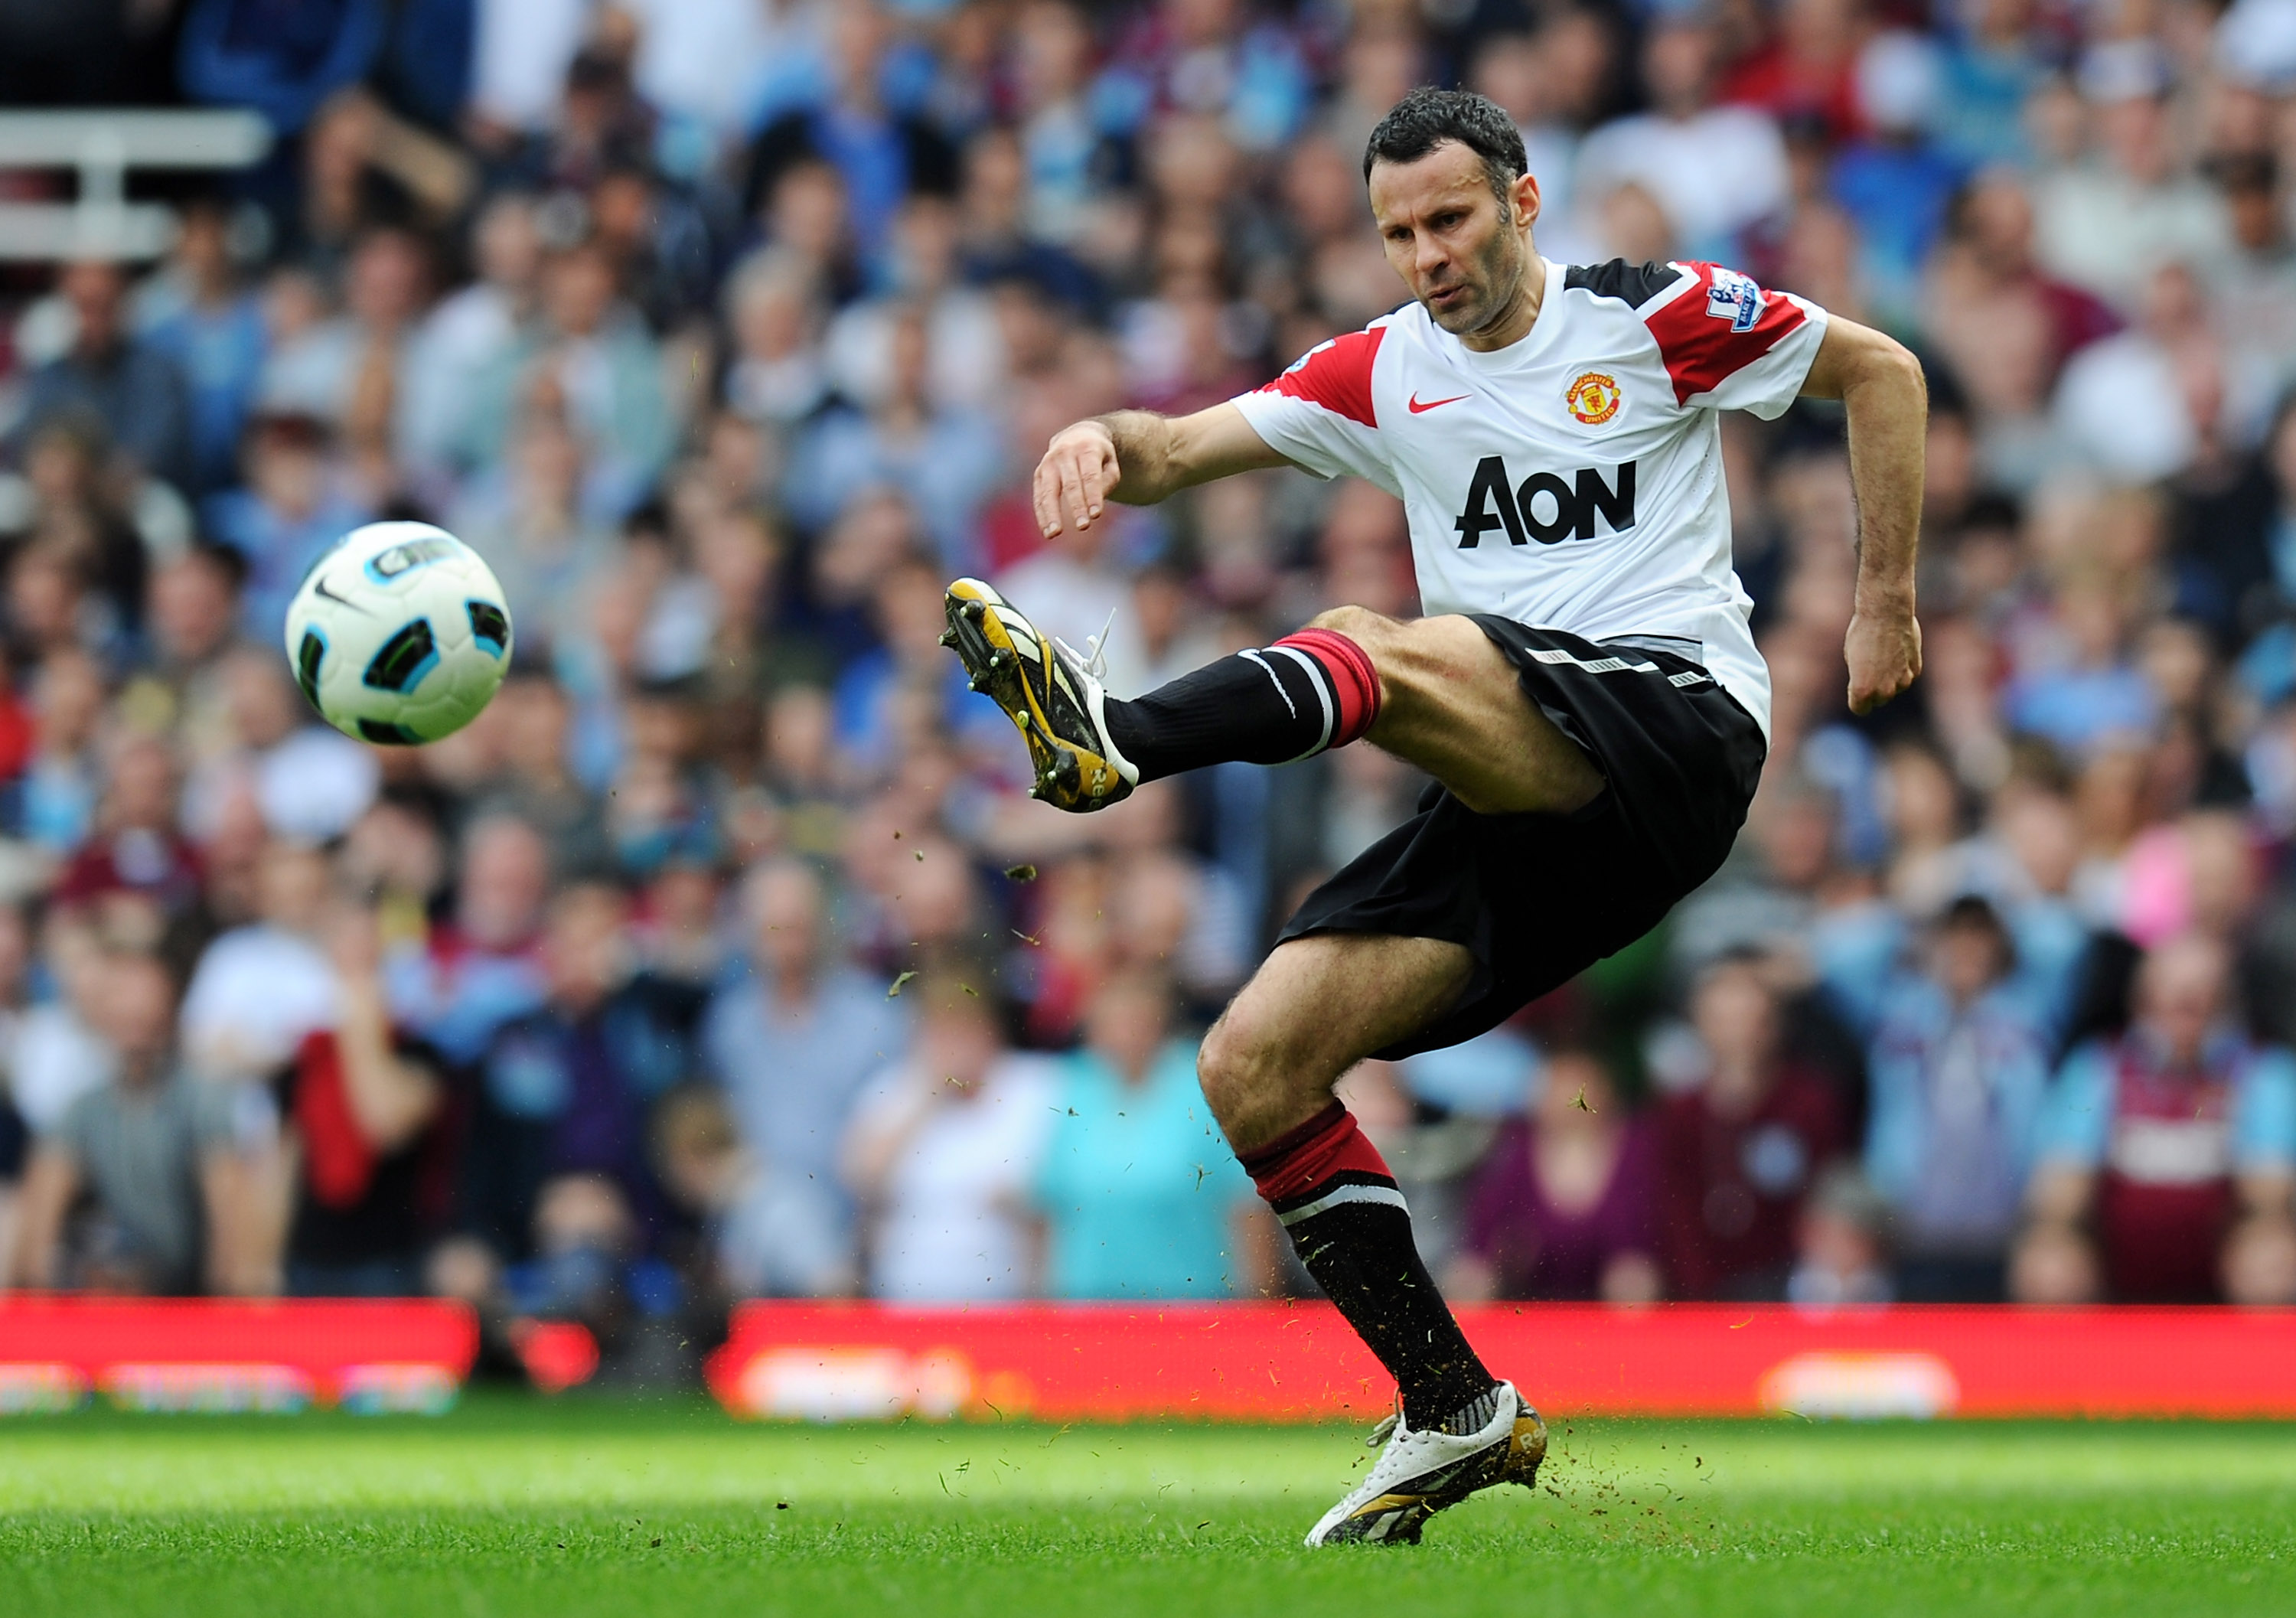 Ryan Giggs: The Welsh Wizard